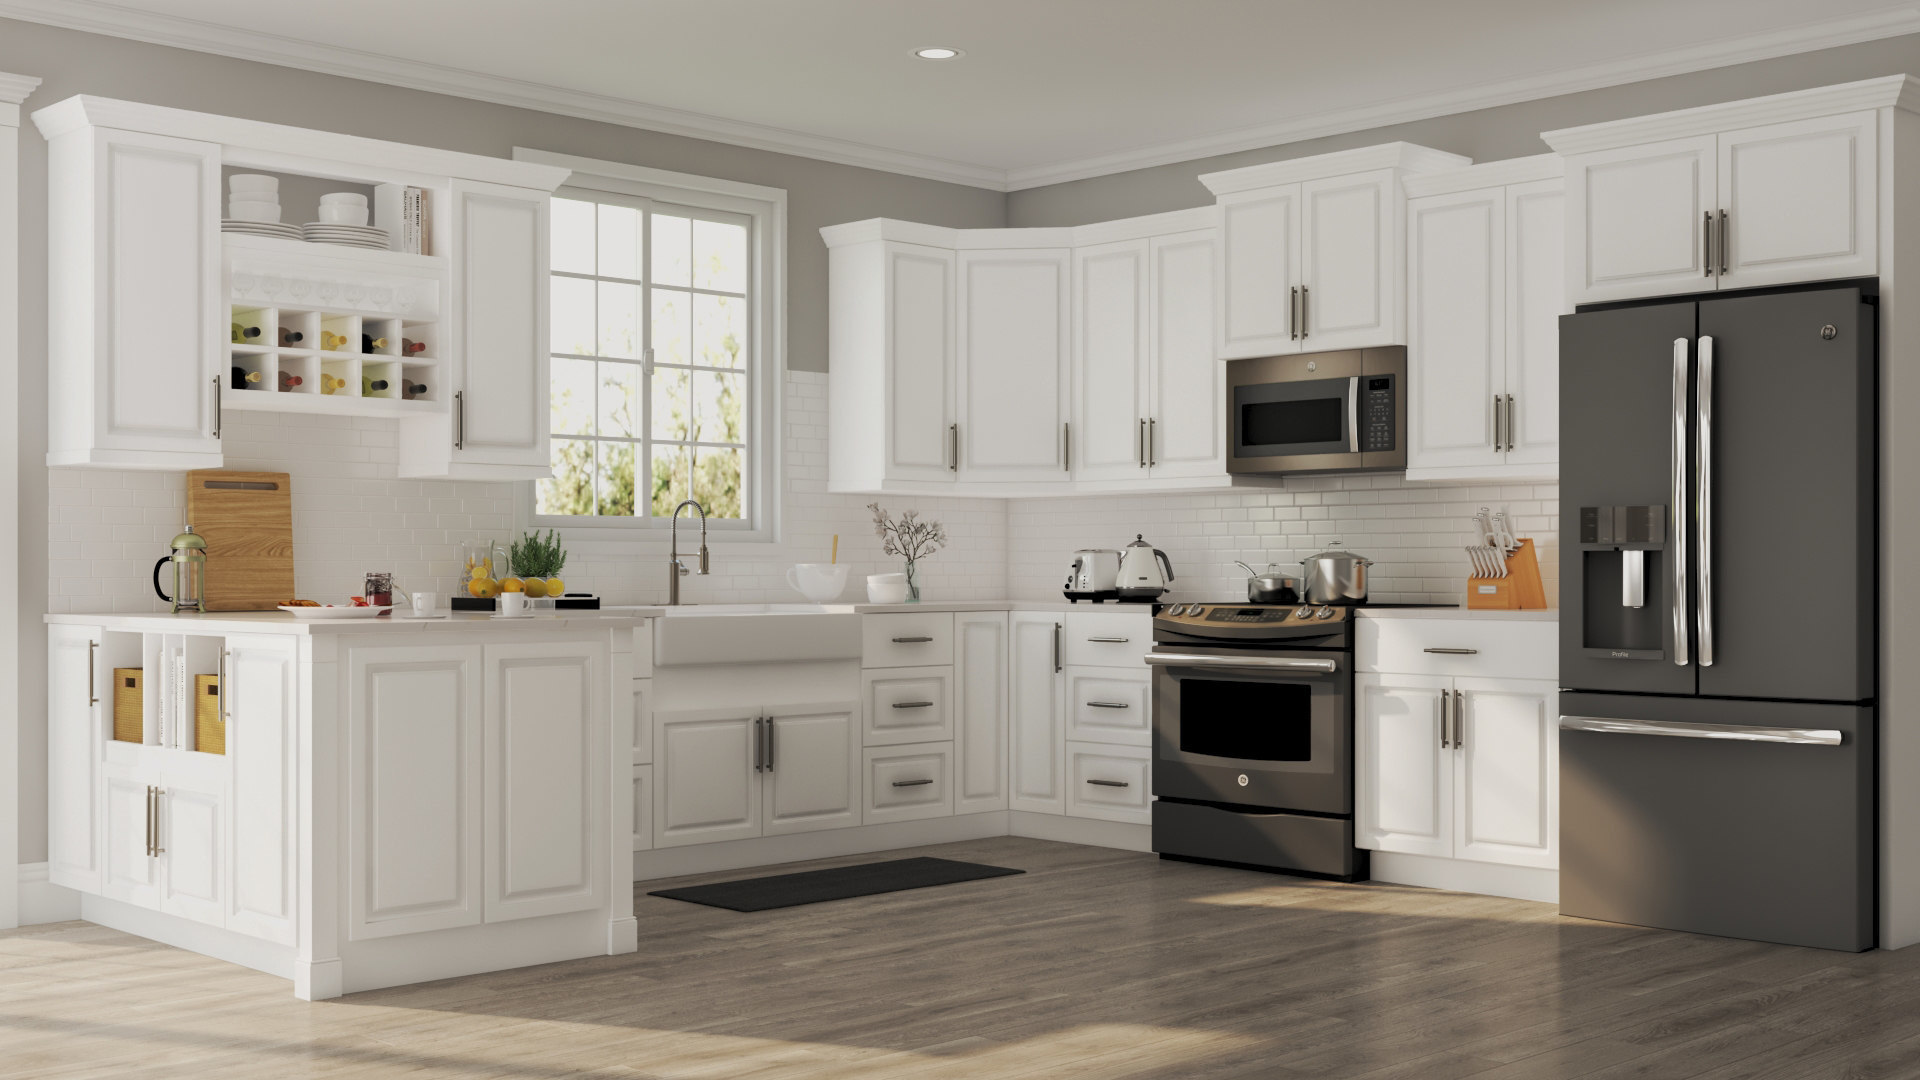 Simple Is Lowes Or Home Depot Cheaper For Kitchen Cabinets with Simple Decor